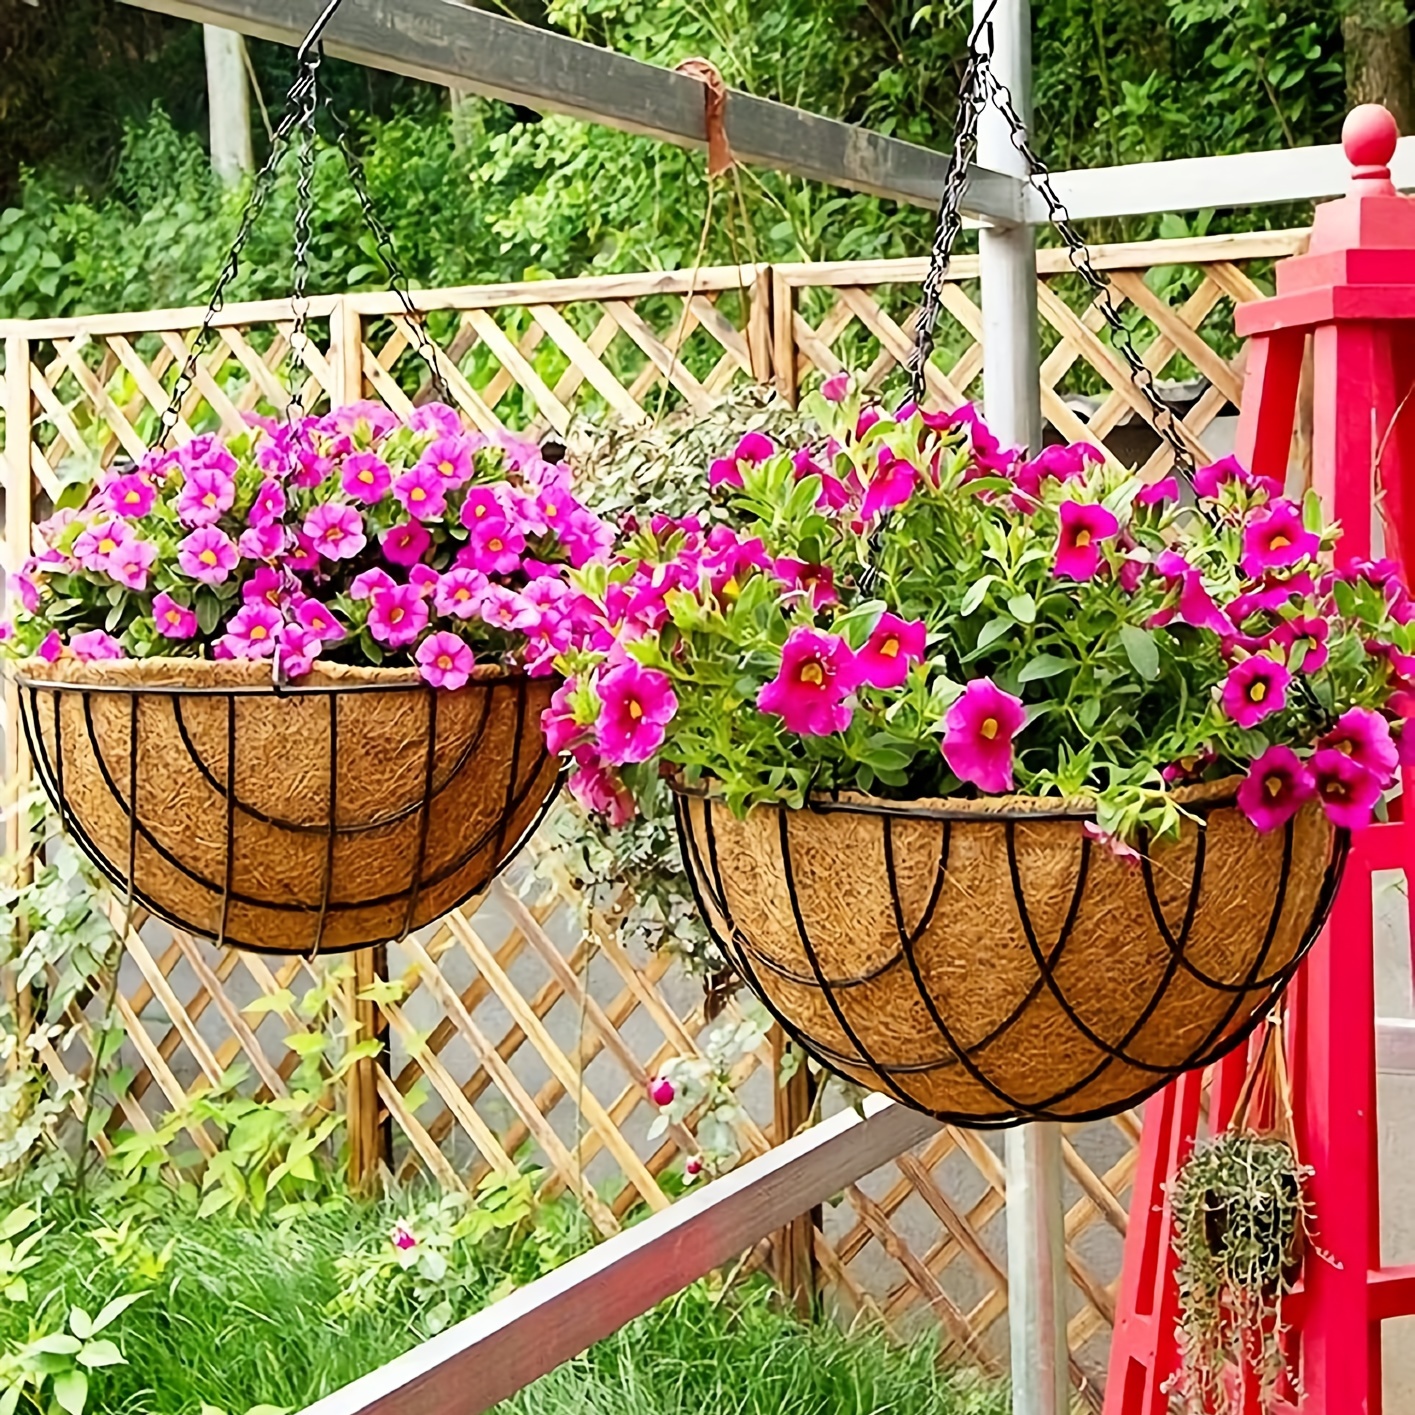 

Add A Touch Of Nature To Your Home Decor With This Stylish Metal Hanging Planter Basket, Garden Tool